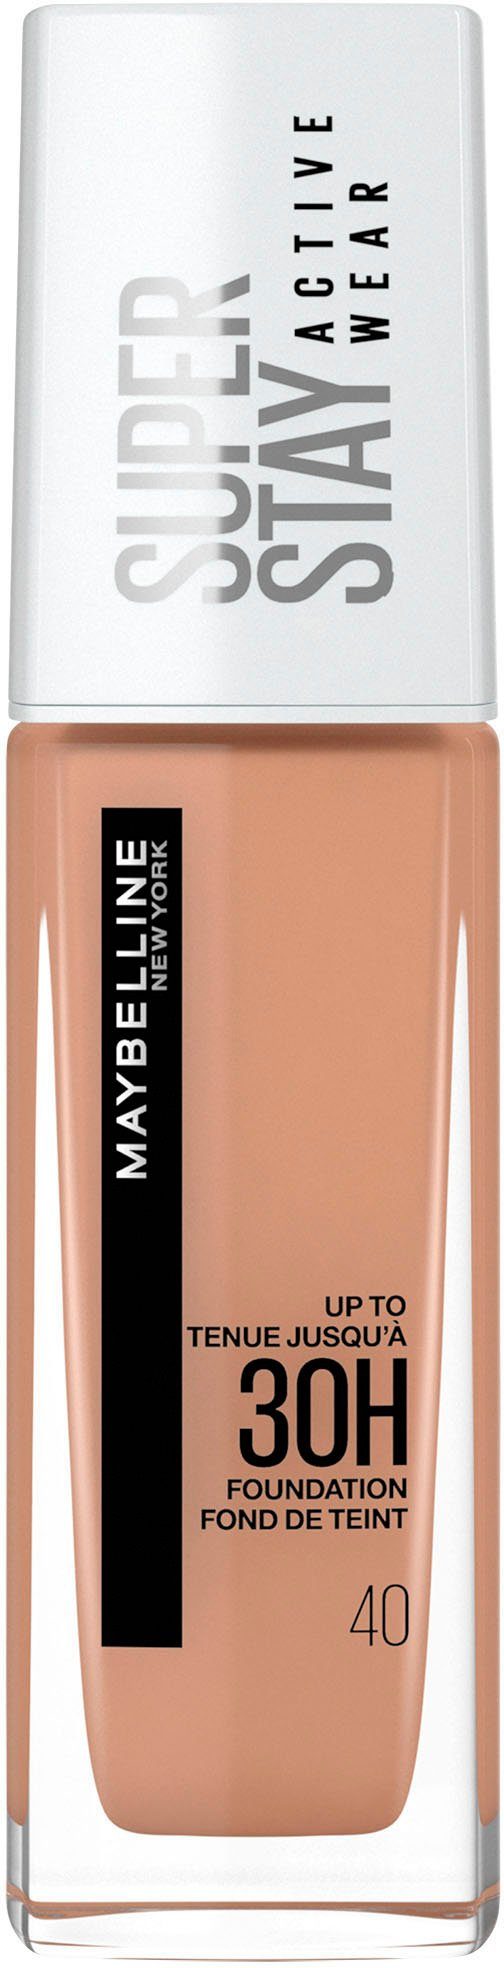 Foundation Active NEW YORK Fawn 40 MAYBELLINE Wear Super Stay